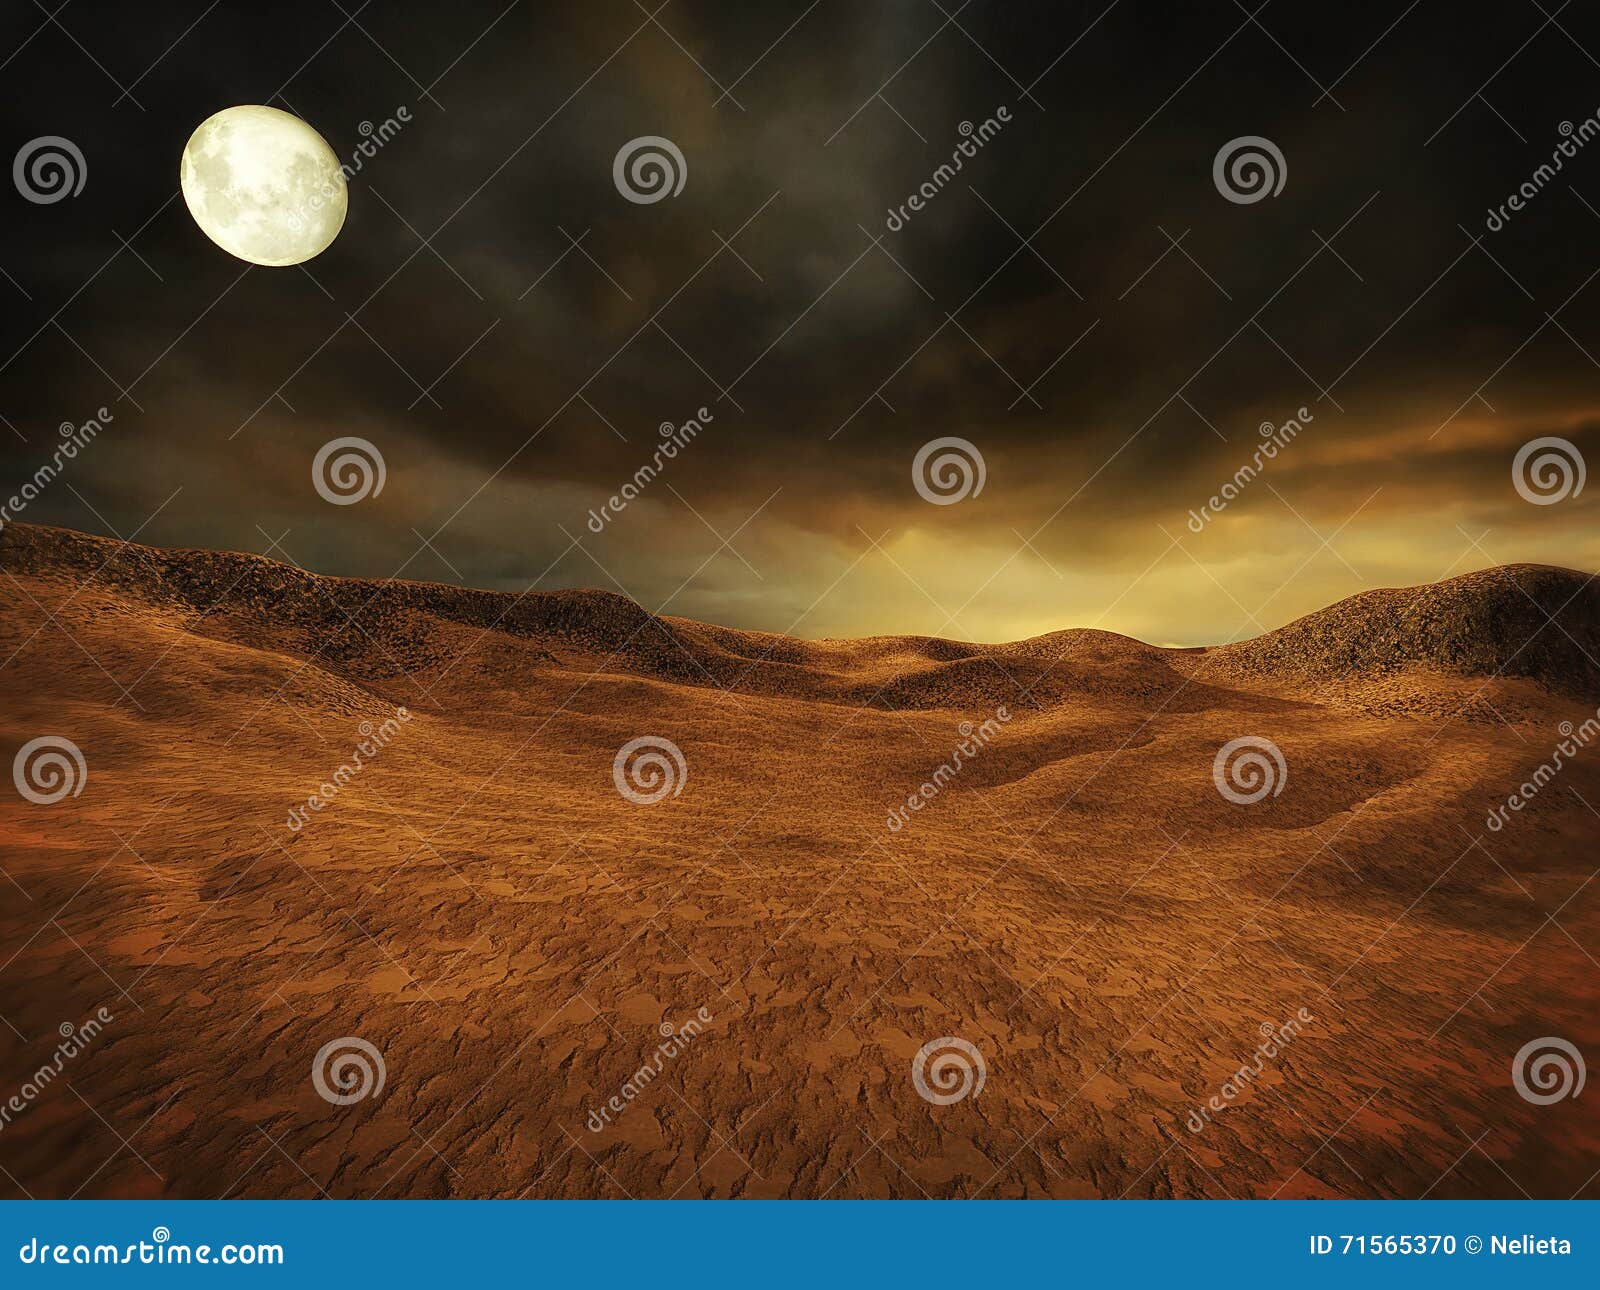 deserted landscape with moon